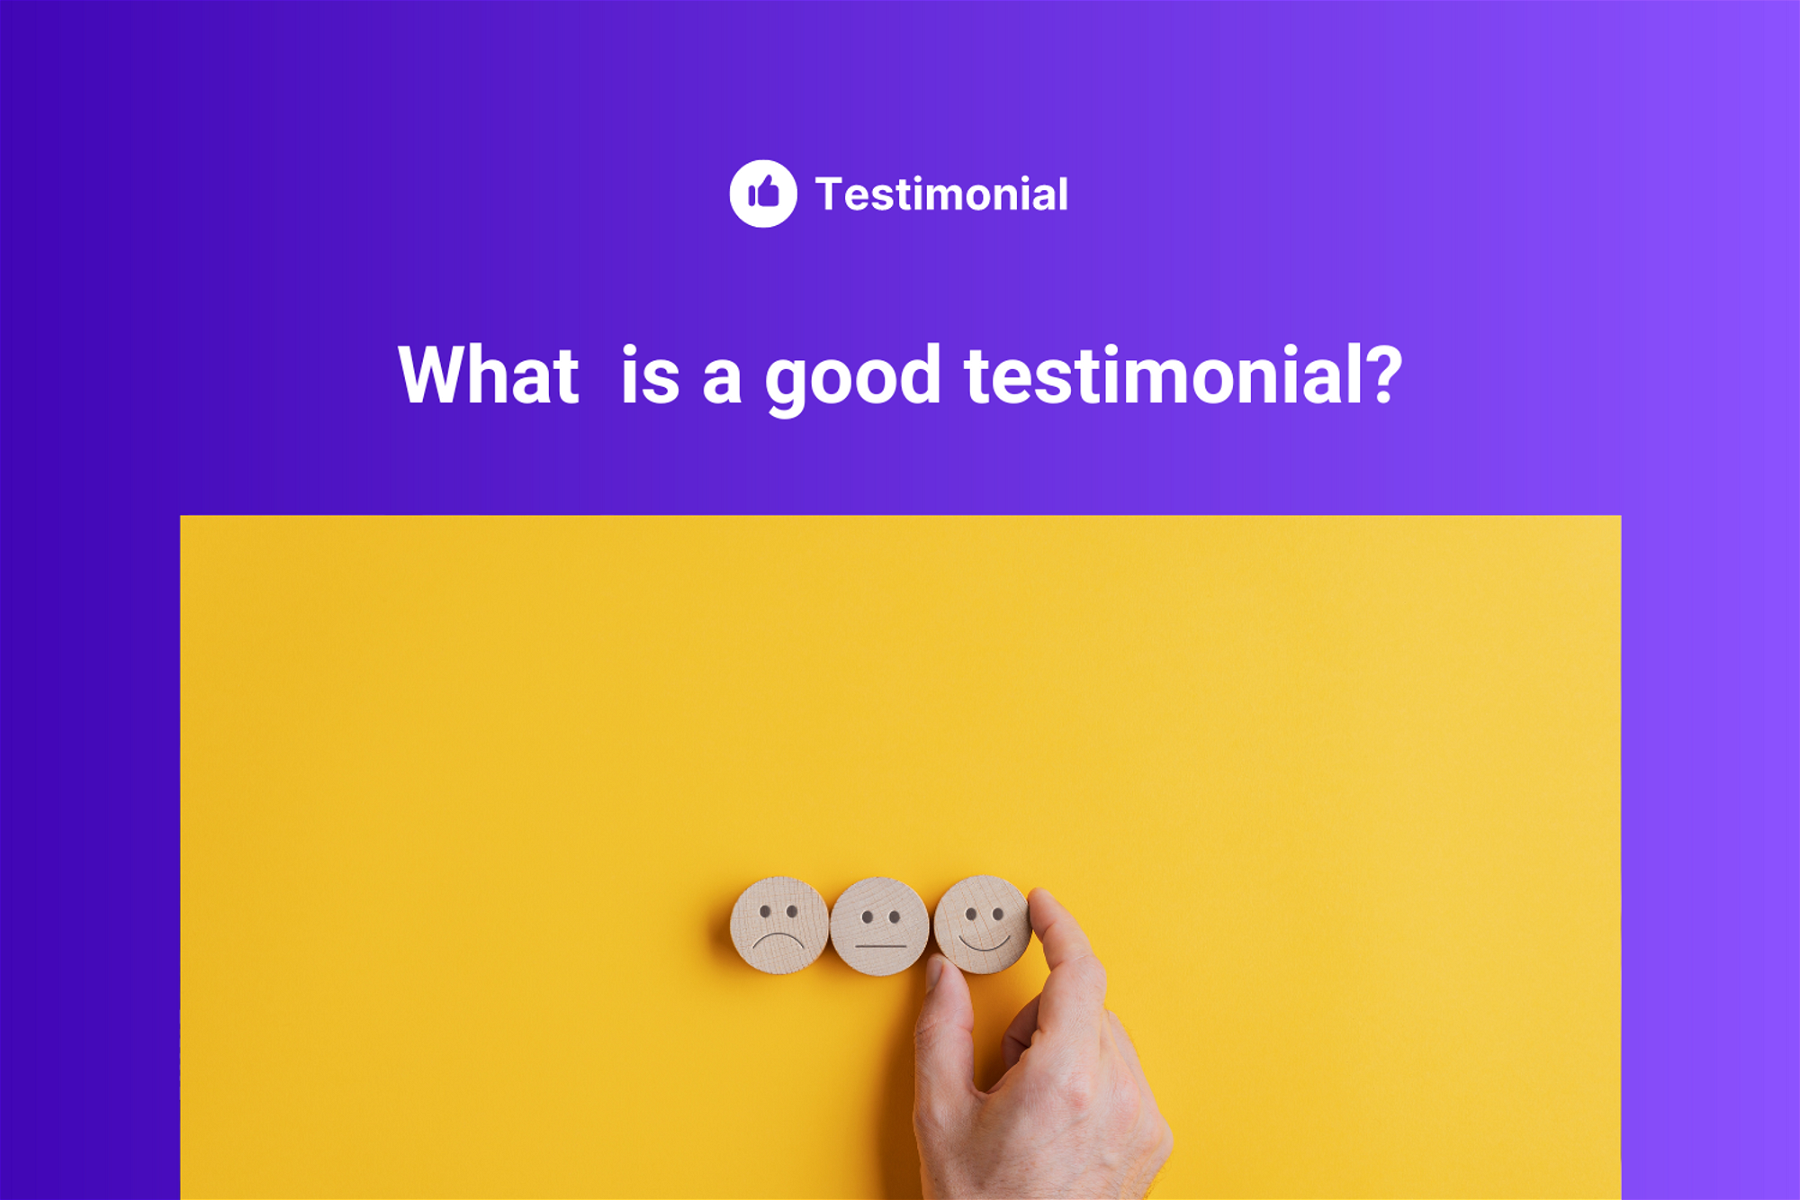 What is a good testimonial?